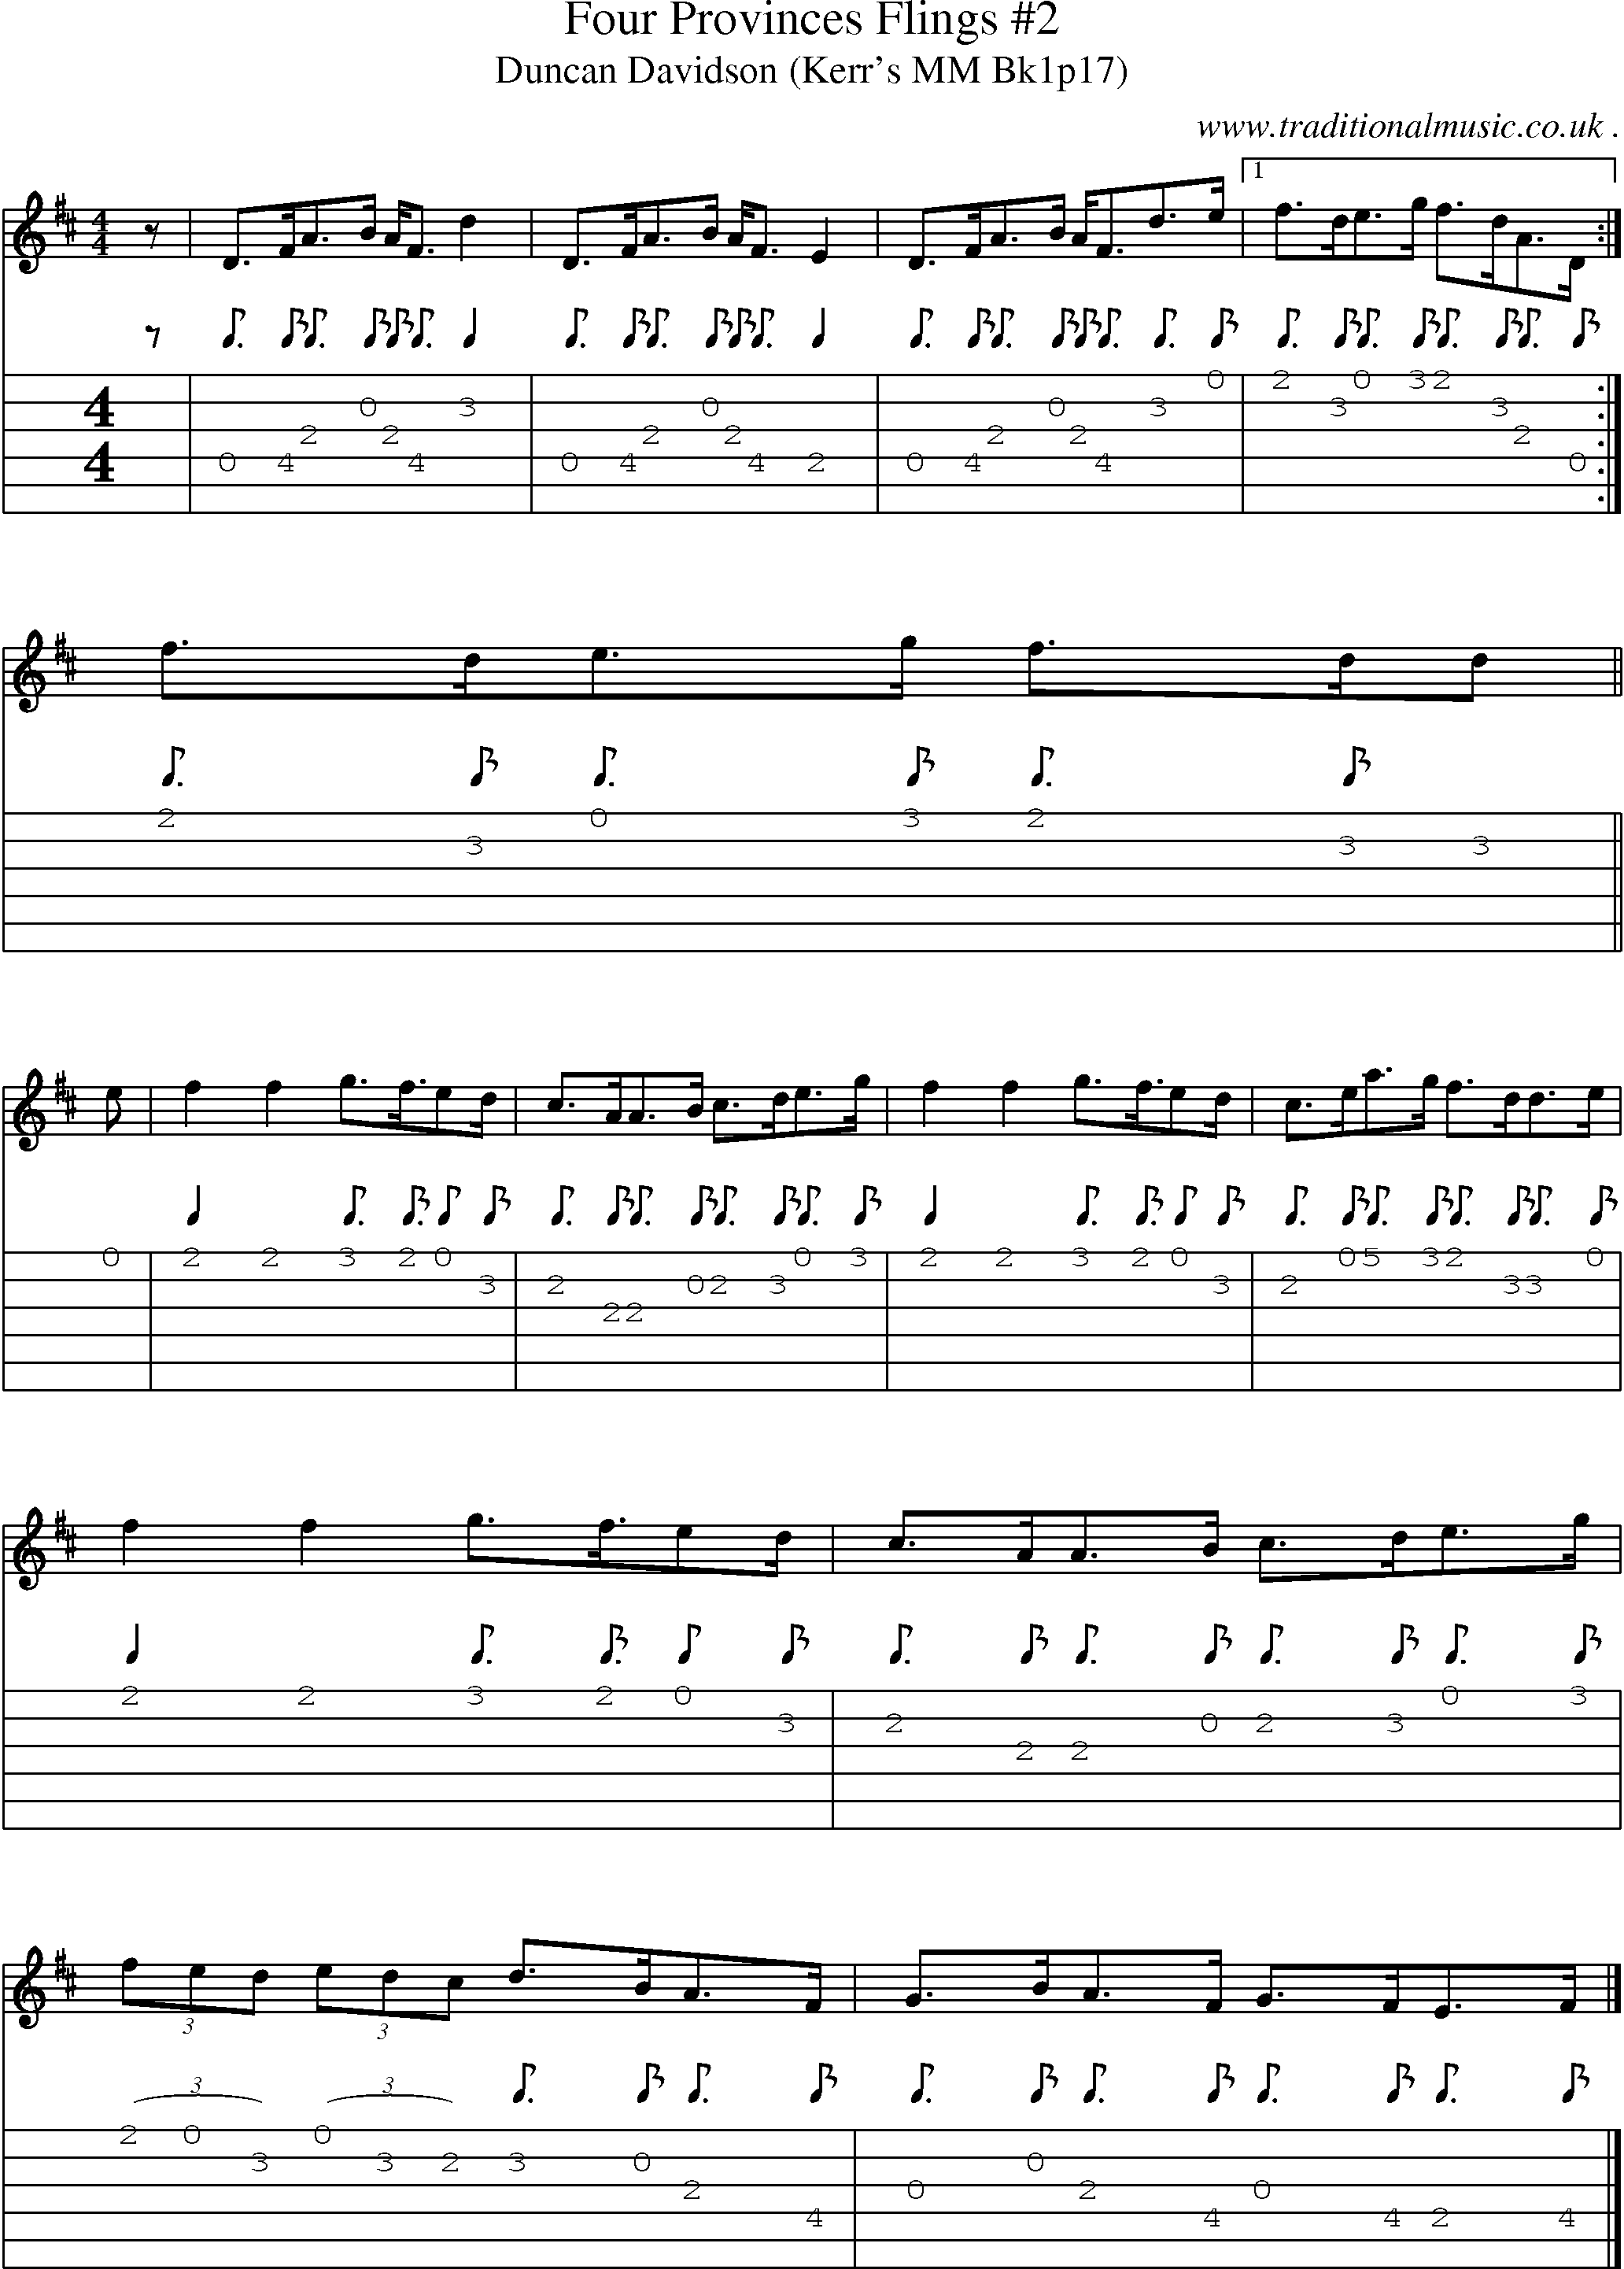 Sheet-music  score, Chords and Guitar Tabs for Four Provinces Flings 2